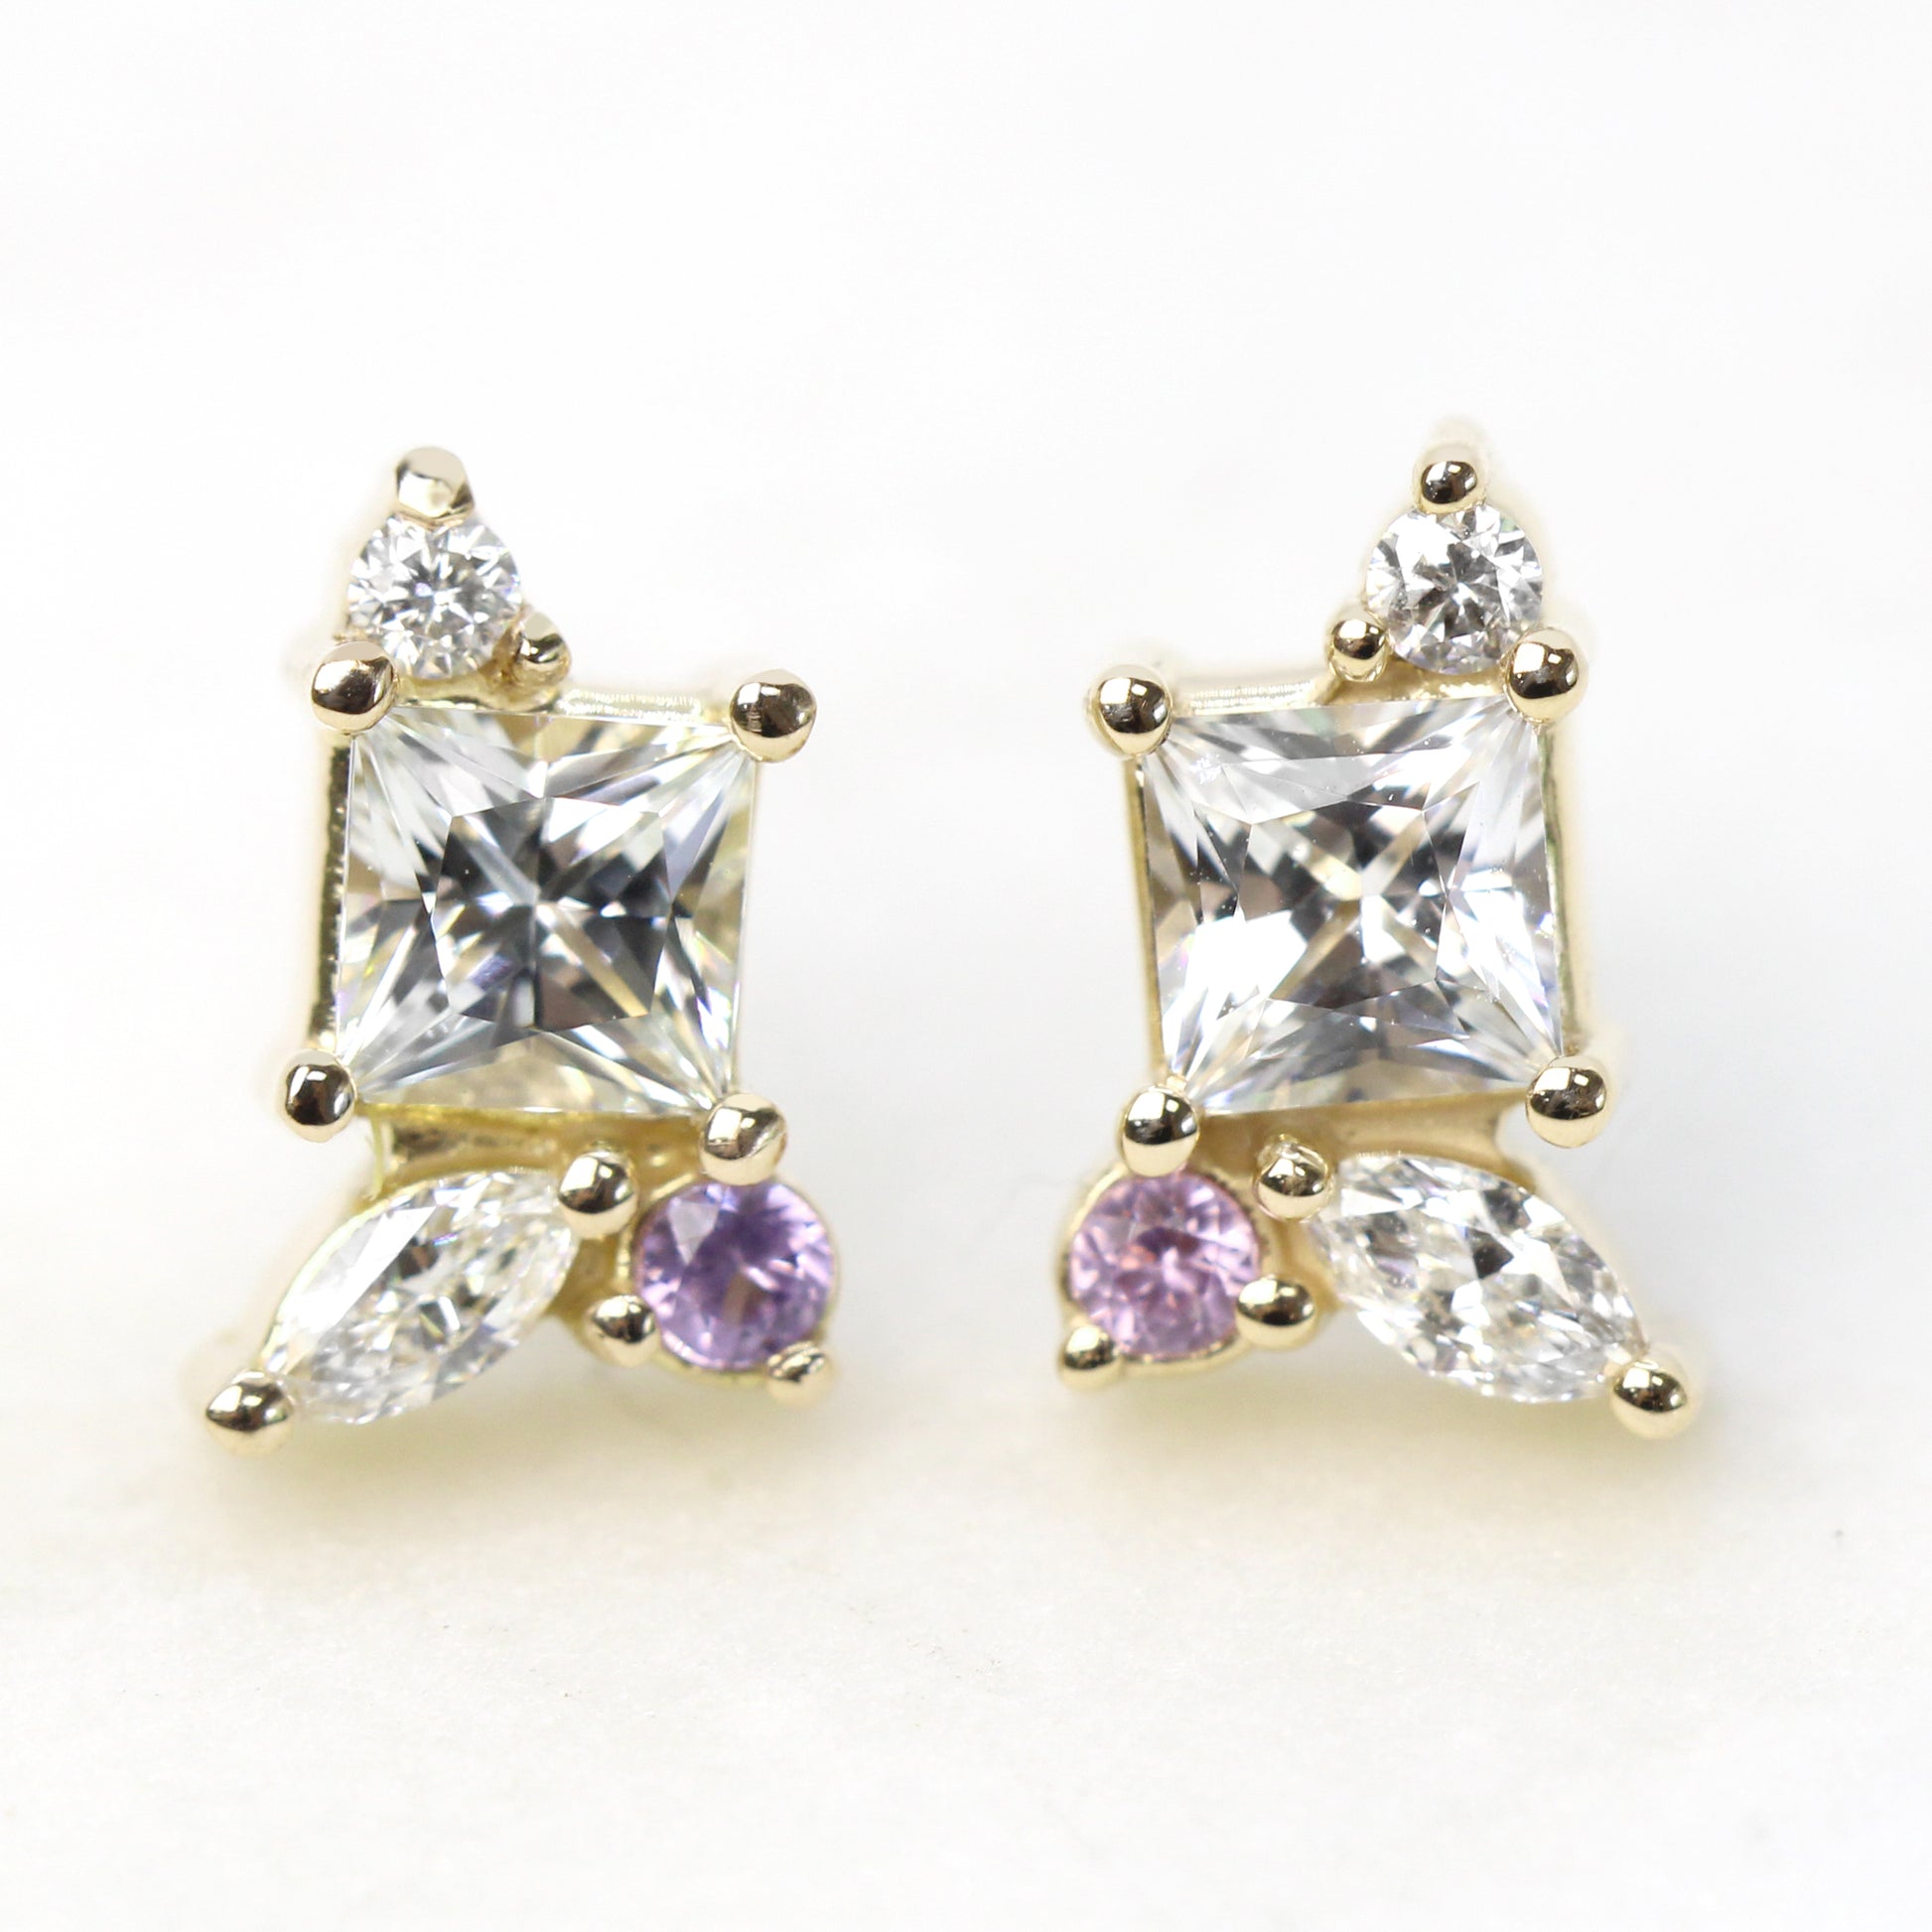 CAELEN (M) Princess Cut White Sapphire Cluster Earrings with Diamond & Pink Sapphire Accents - Made to Order, Your Choice of 14k Gold - Midwinter Co. Alternative Bridal Rings and Modern Fine Jewelry